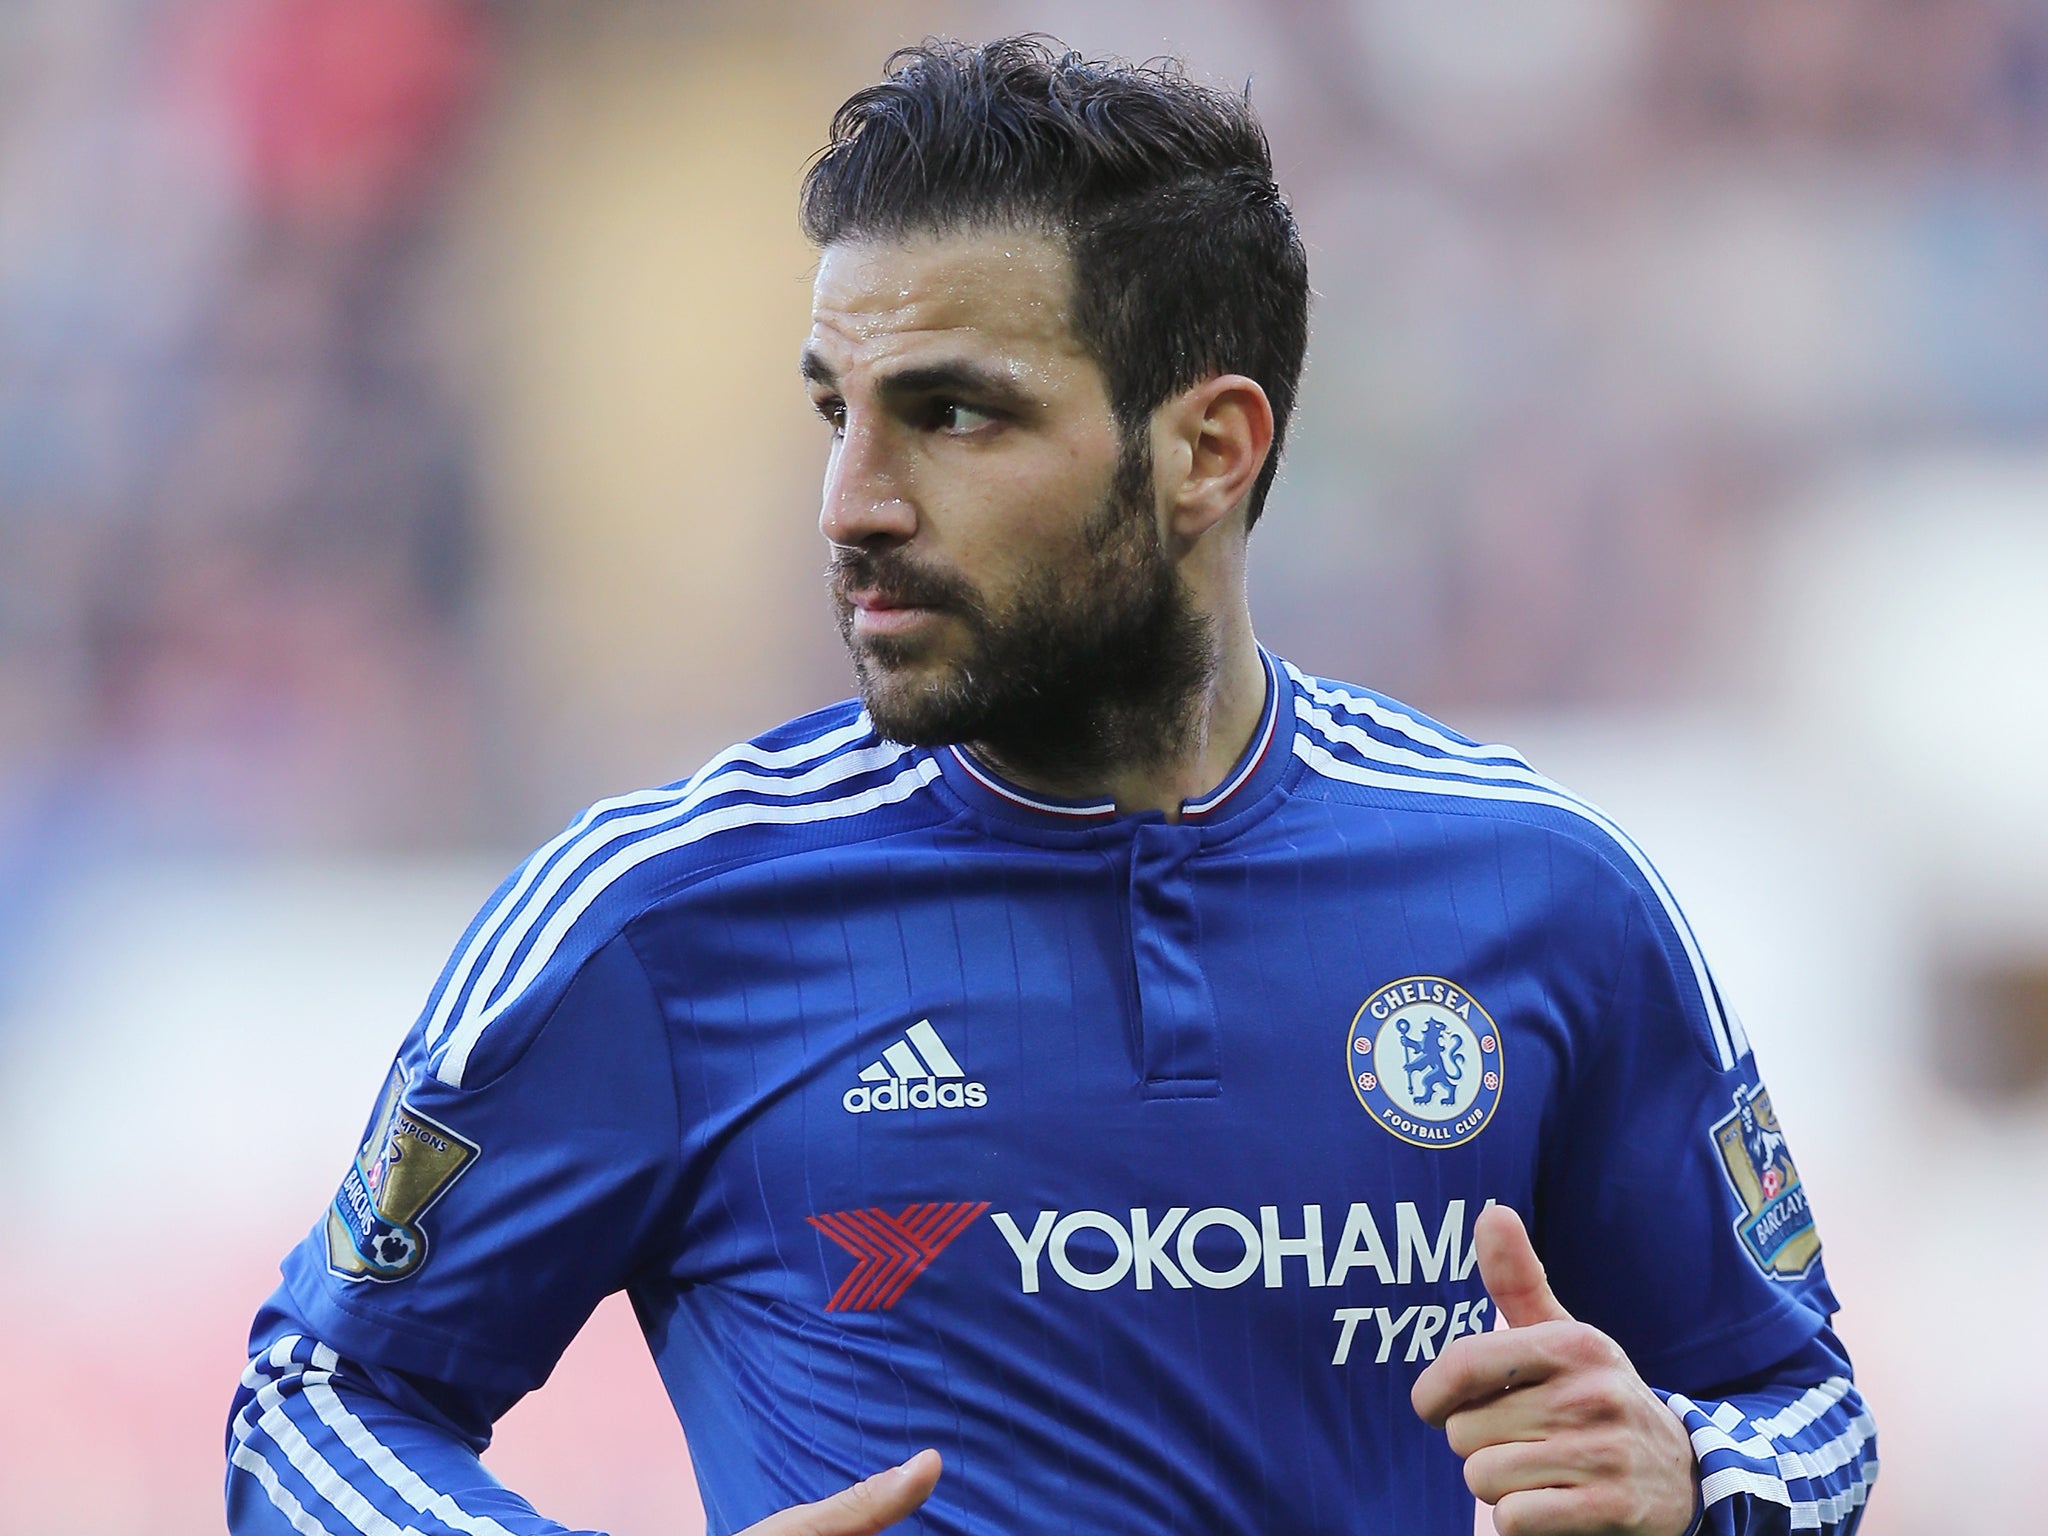 Fabregas lost faith in his own ability during Chelsea's early season slump